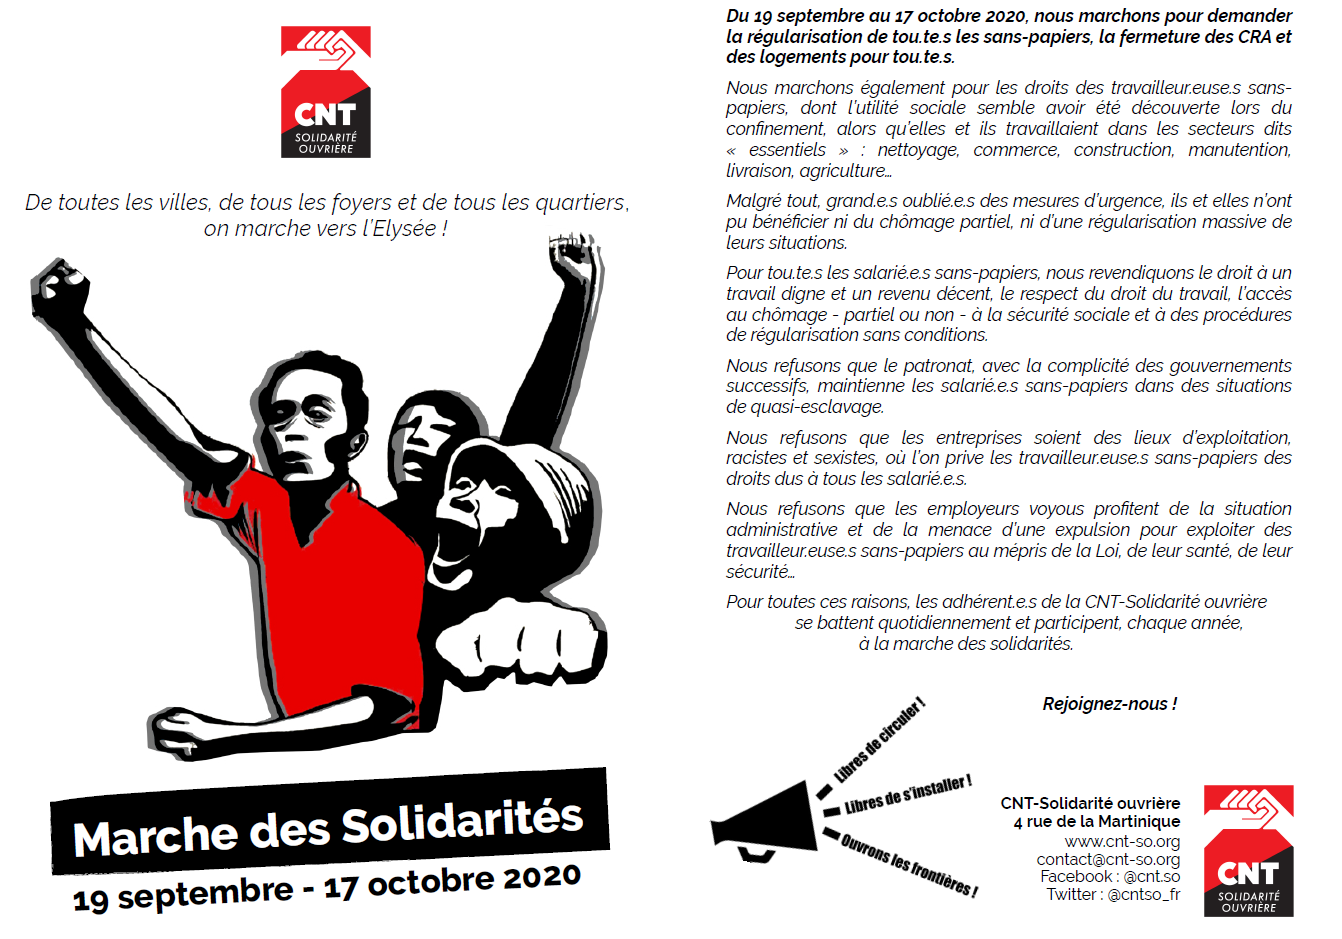 tractmarchesolidarite2020_web-page1.png